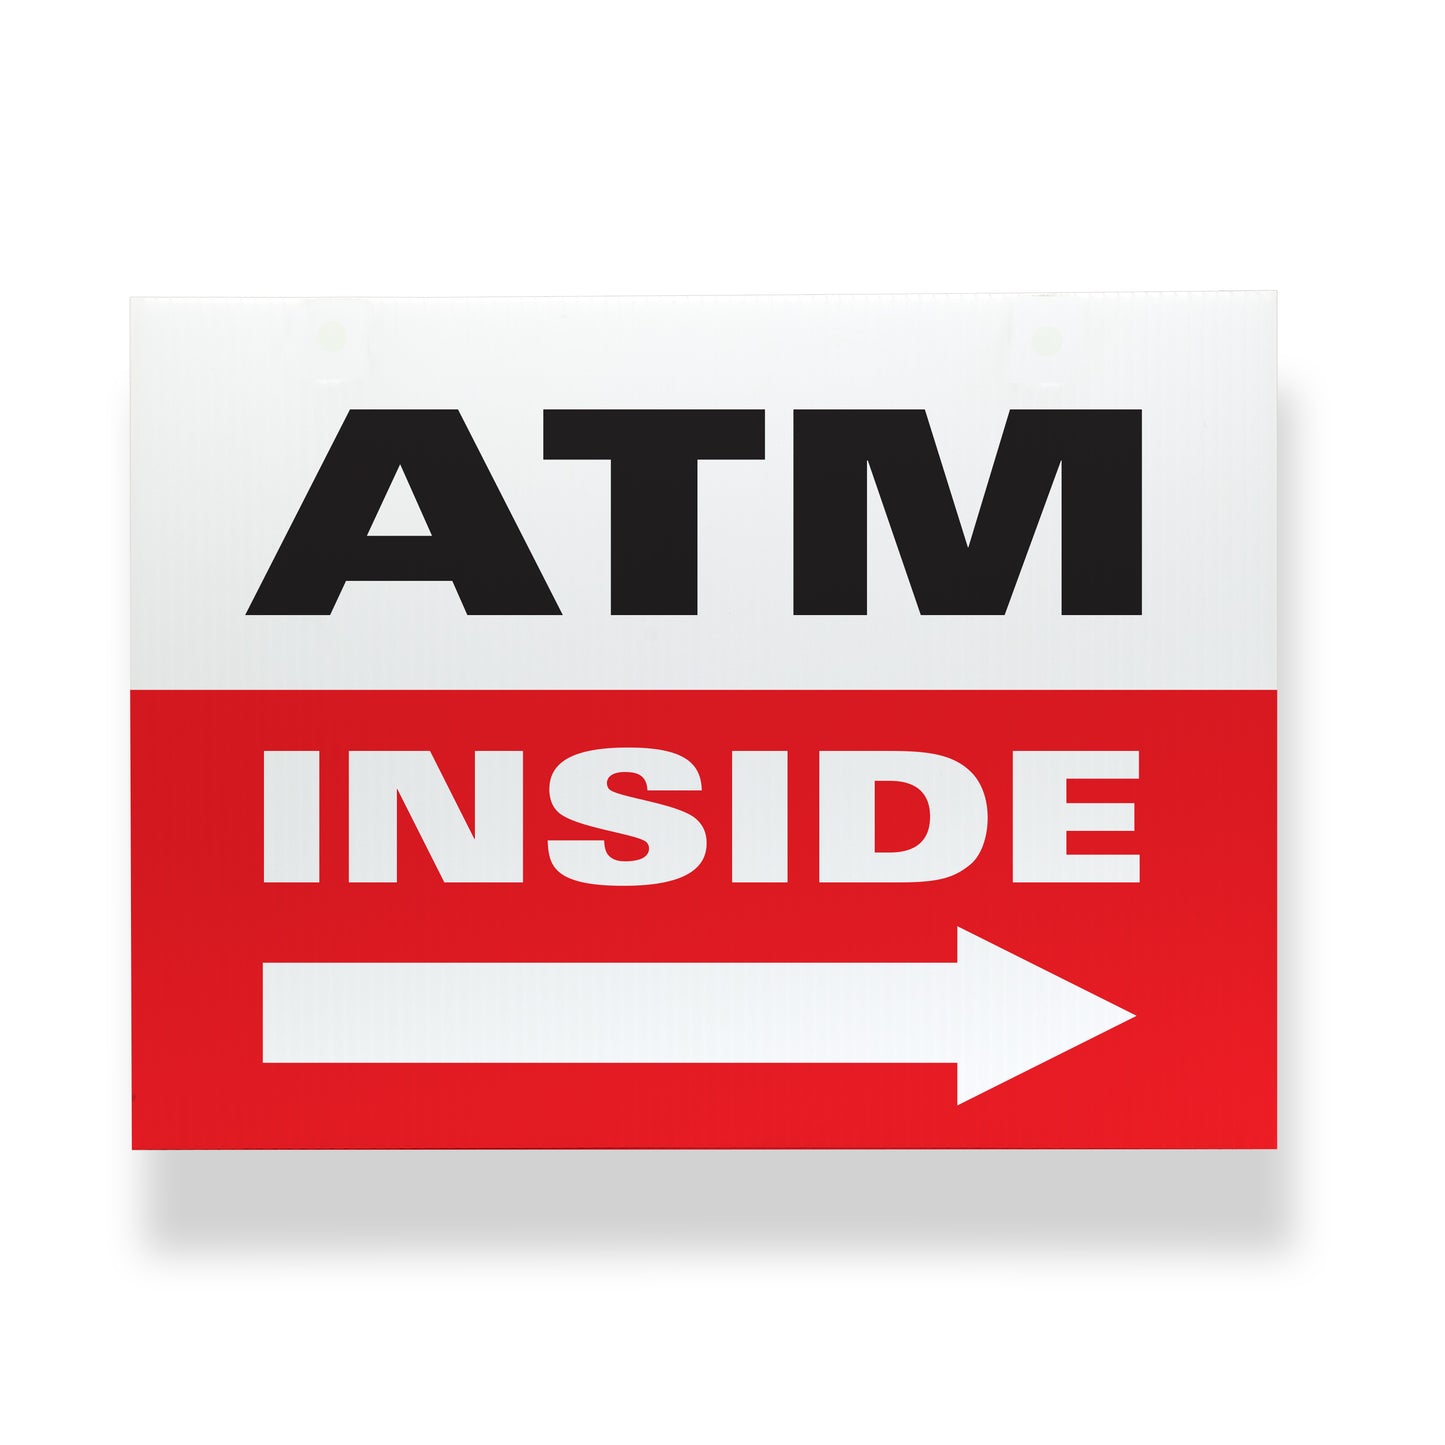 Coroplast sign showing ATM Inside with arrow